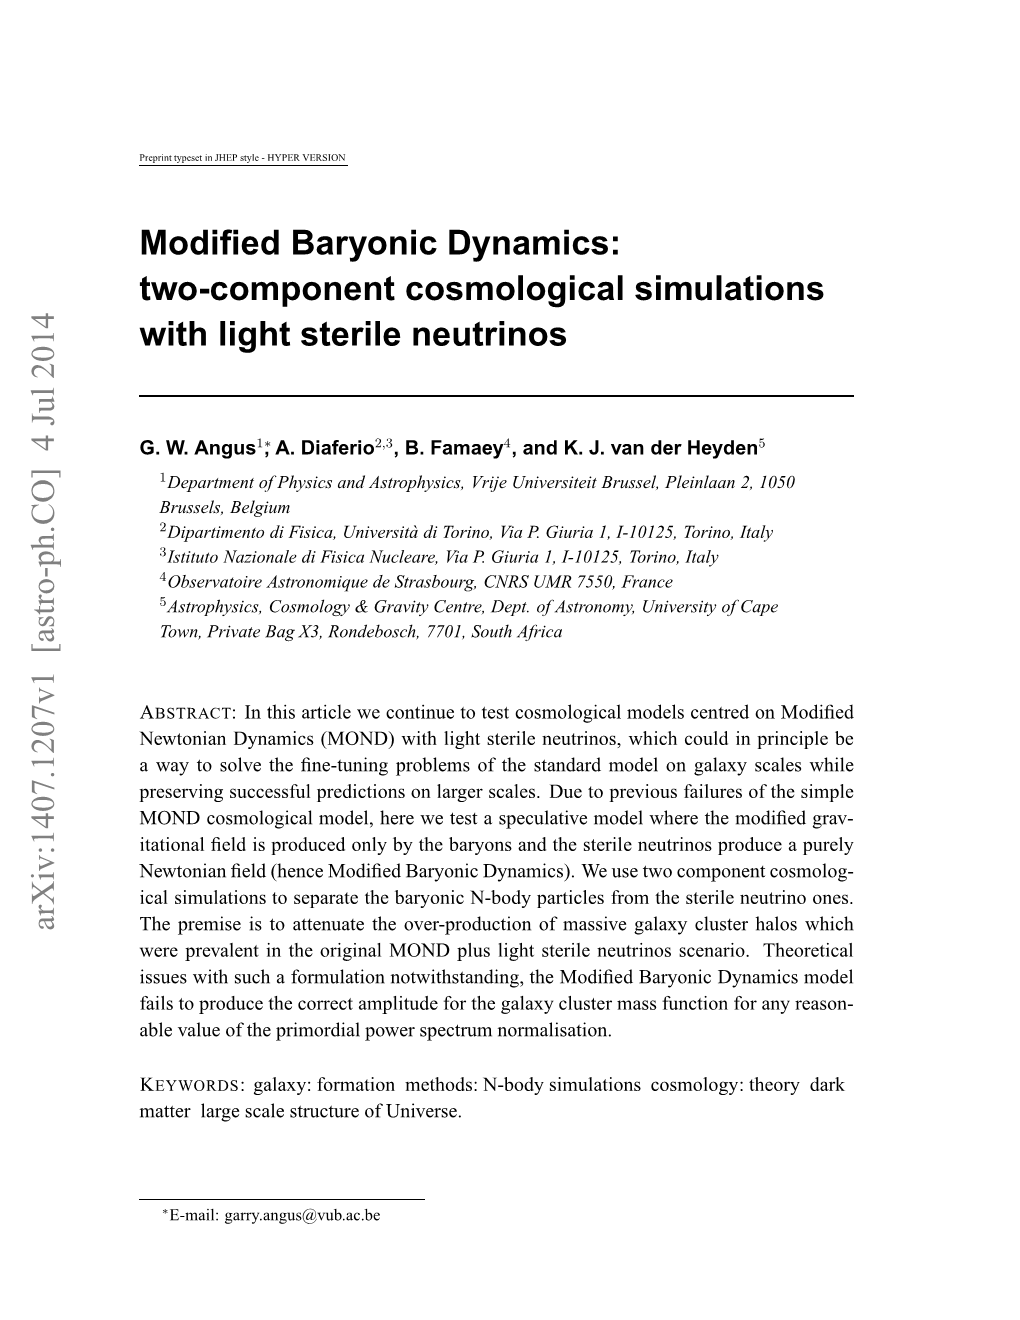 Modified Baryonic Dynamics: Two-Component Cosmological